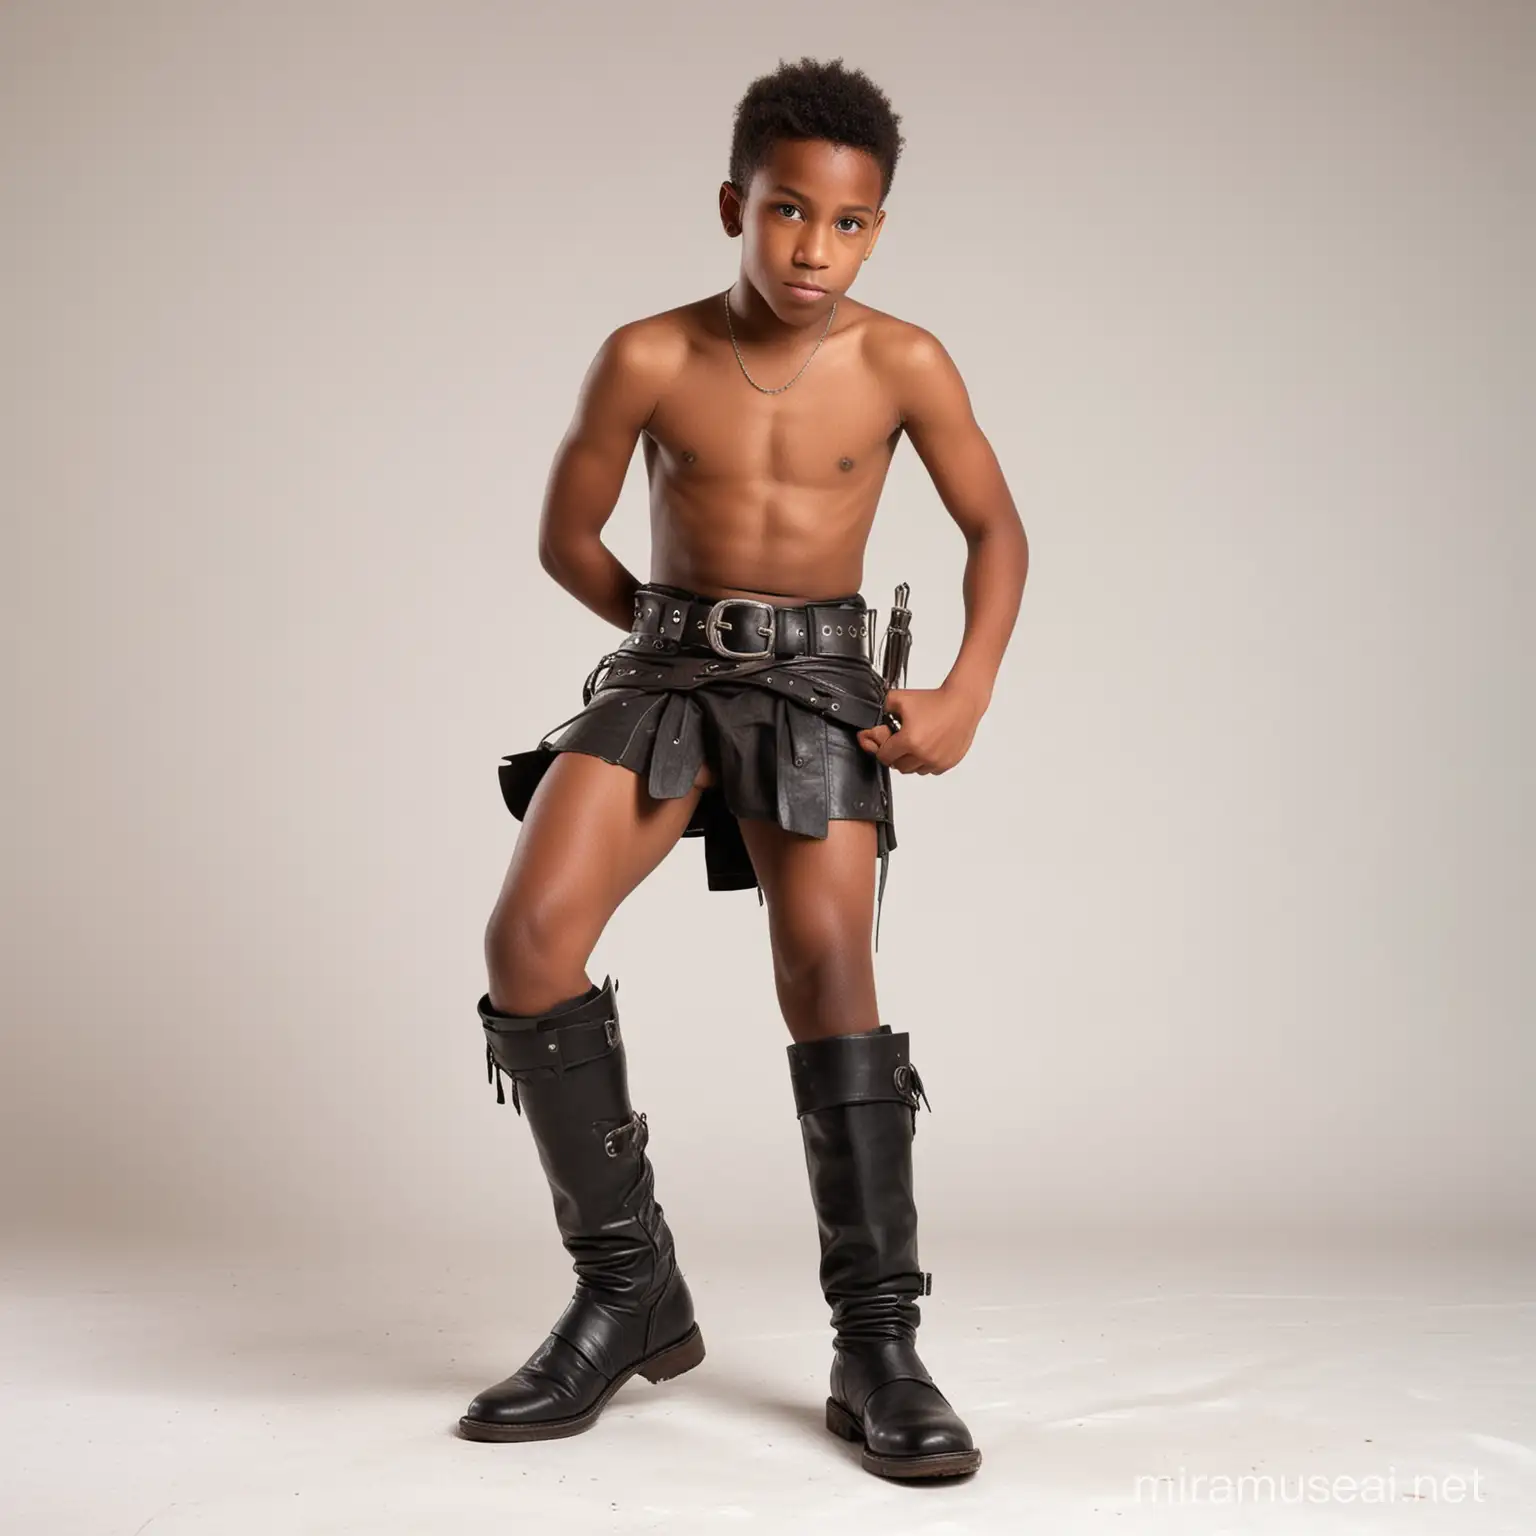 Courageous Young Warrior in Leather Gear Crouching on White Background